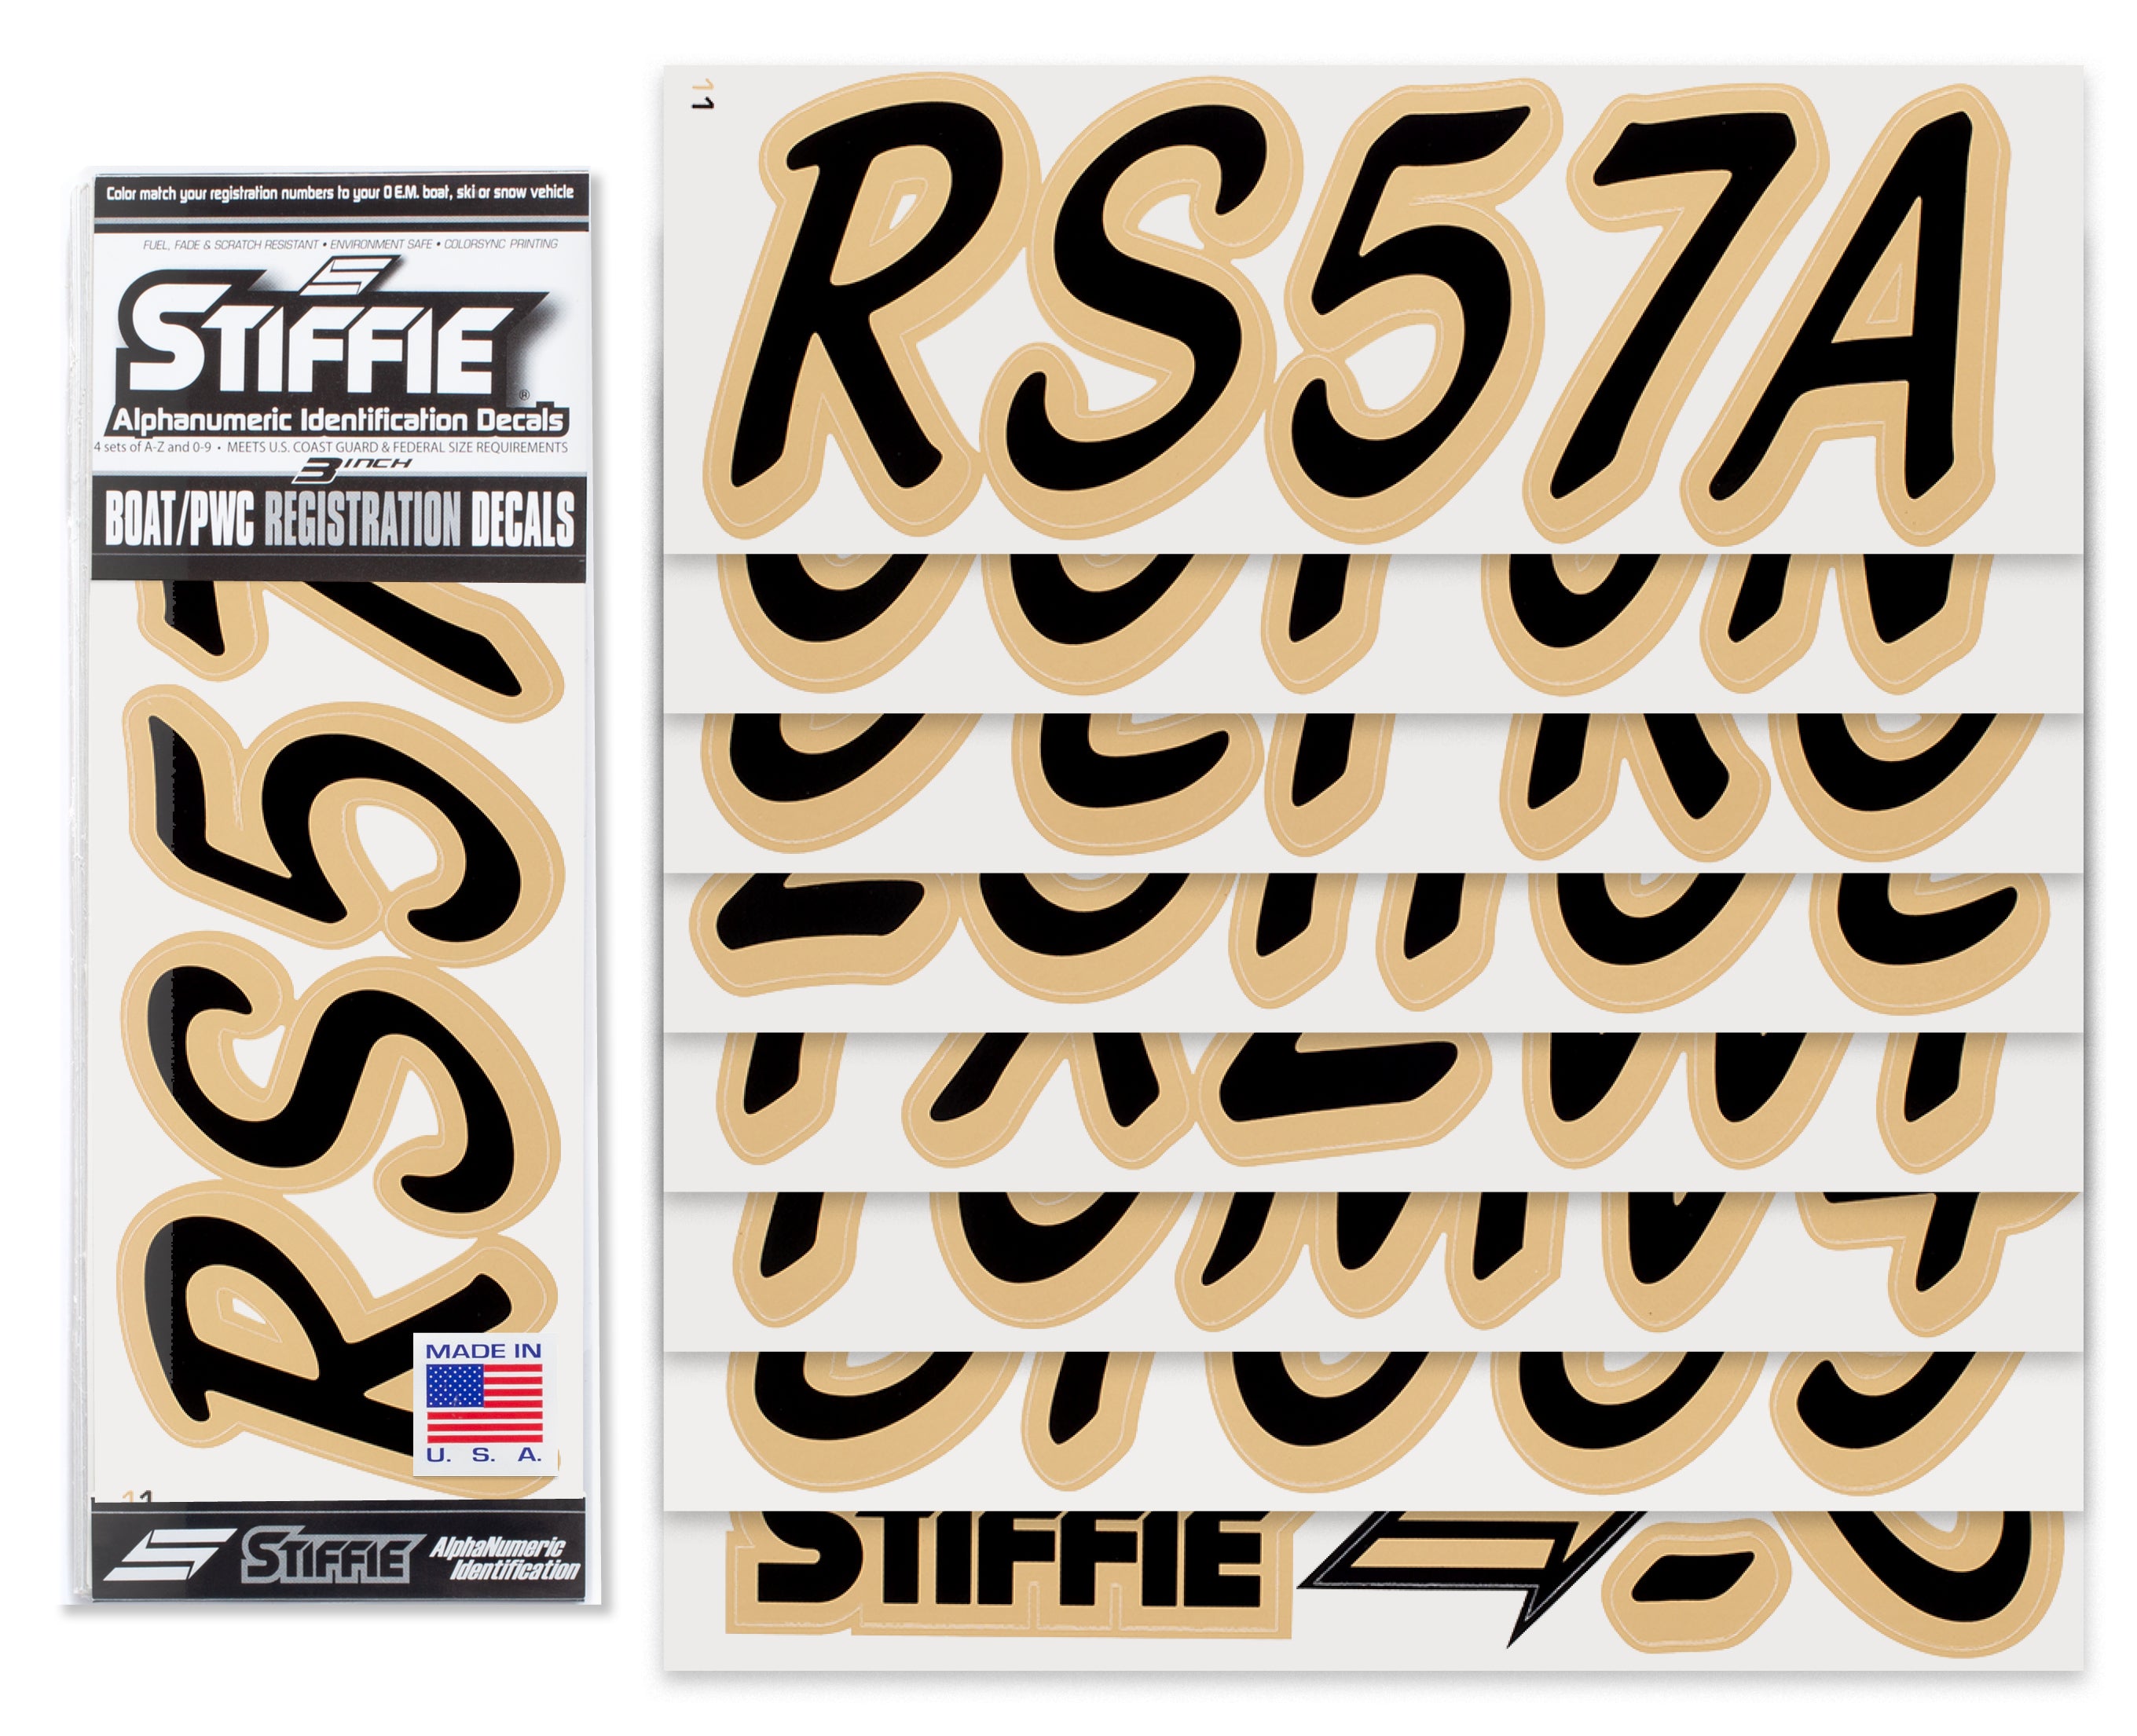 STIFFIE Whipline Solid Black/Tan 3" Alpha-Numeric Registration Identification Numbers Stickers Decals for Boats & Personal Watercraft